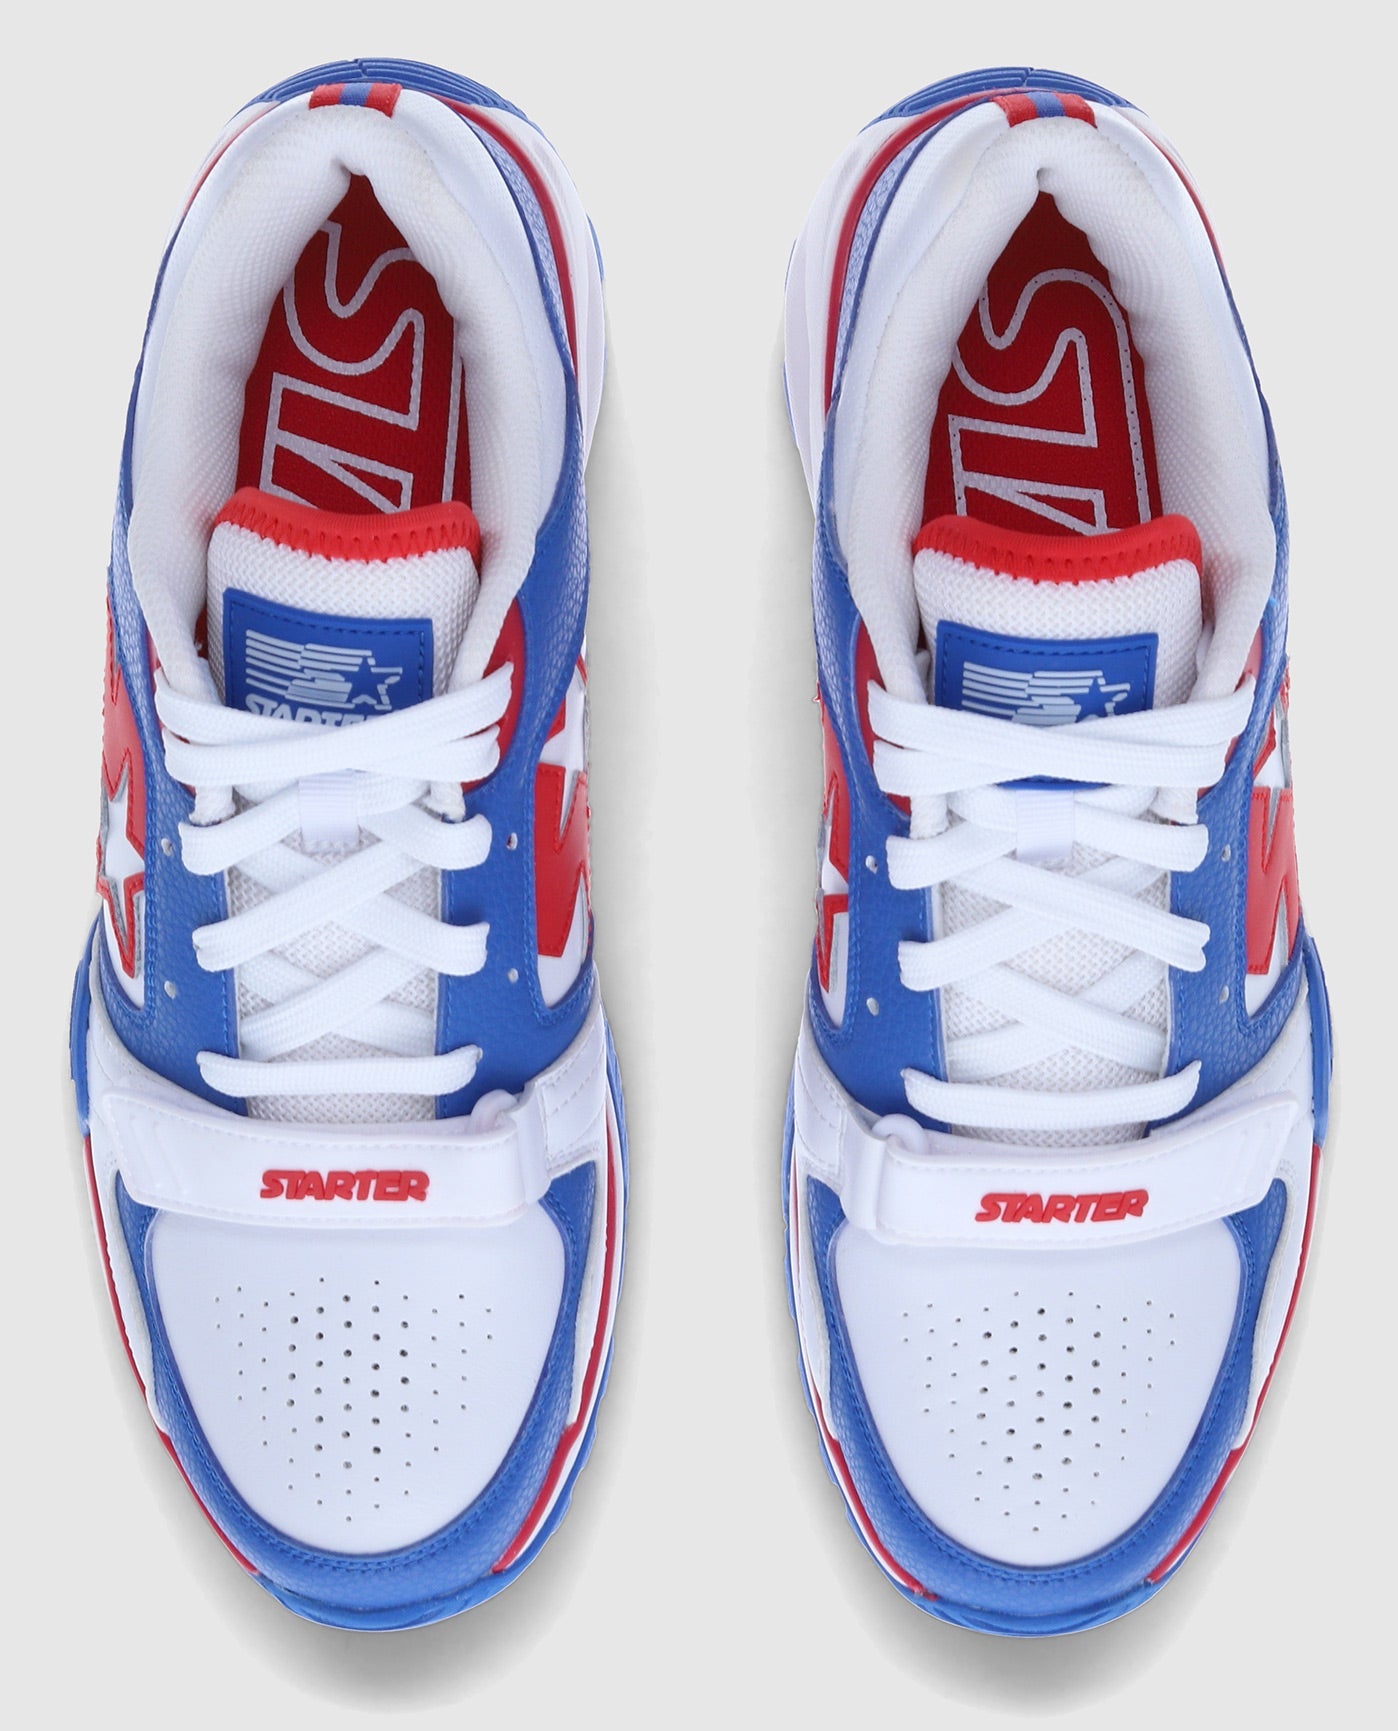 Top Angle Of Starter Team Trainer 92 Low Blue Sneaker Pair | Blue